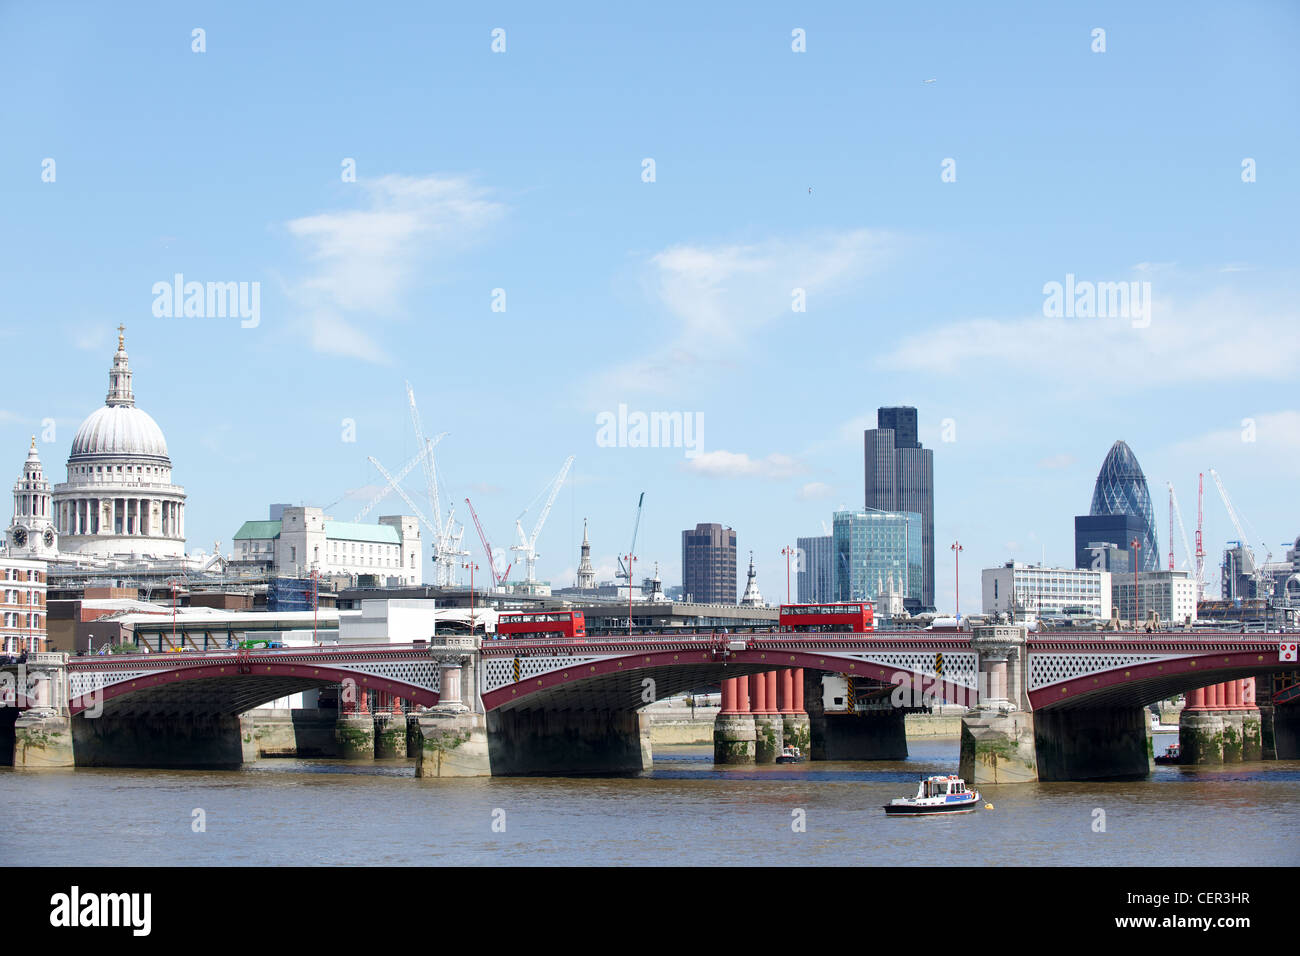 View of Blackfriars Bridge with a red bus and the City of London providing the backdrop. Stock Photo